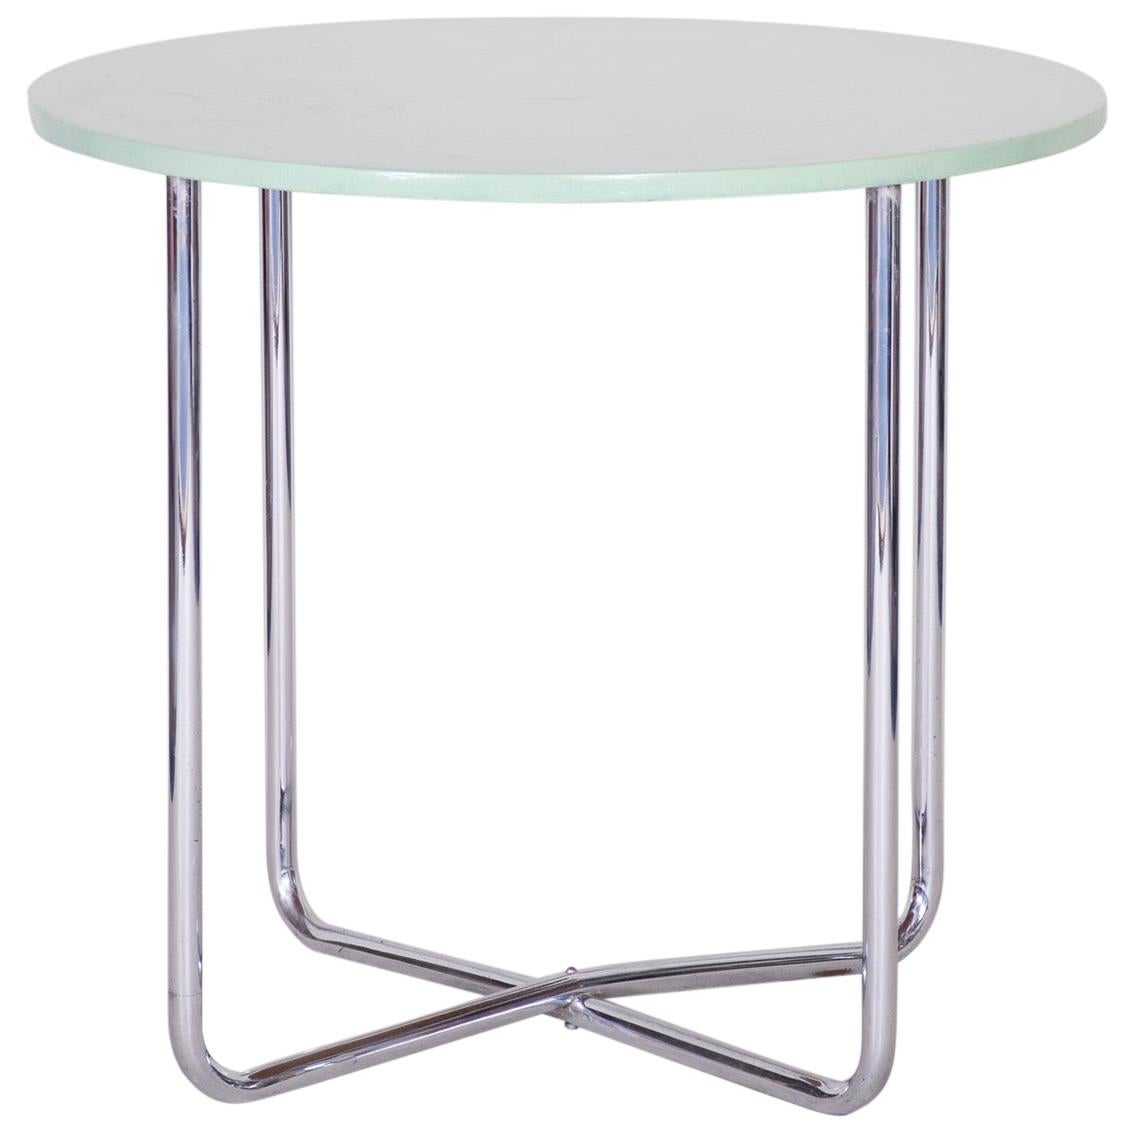 Chrome Czech Bauhaus Green Rounded Table, 1930s, Original Very Well Condition